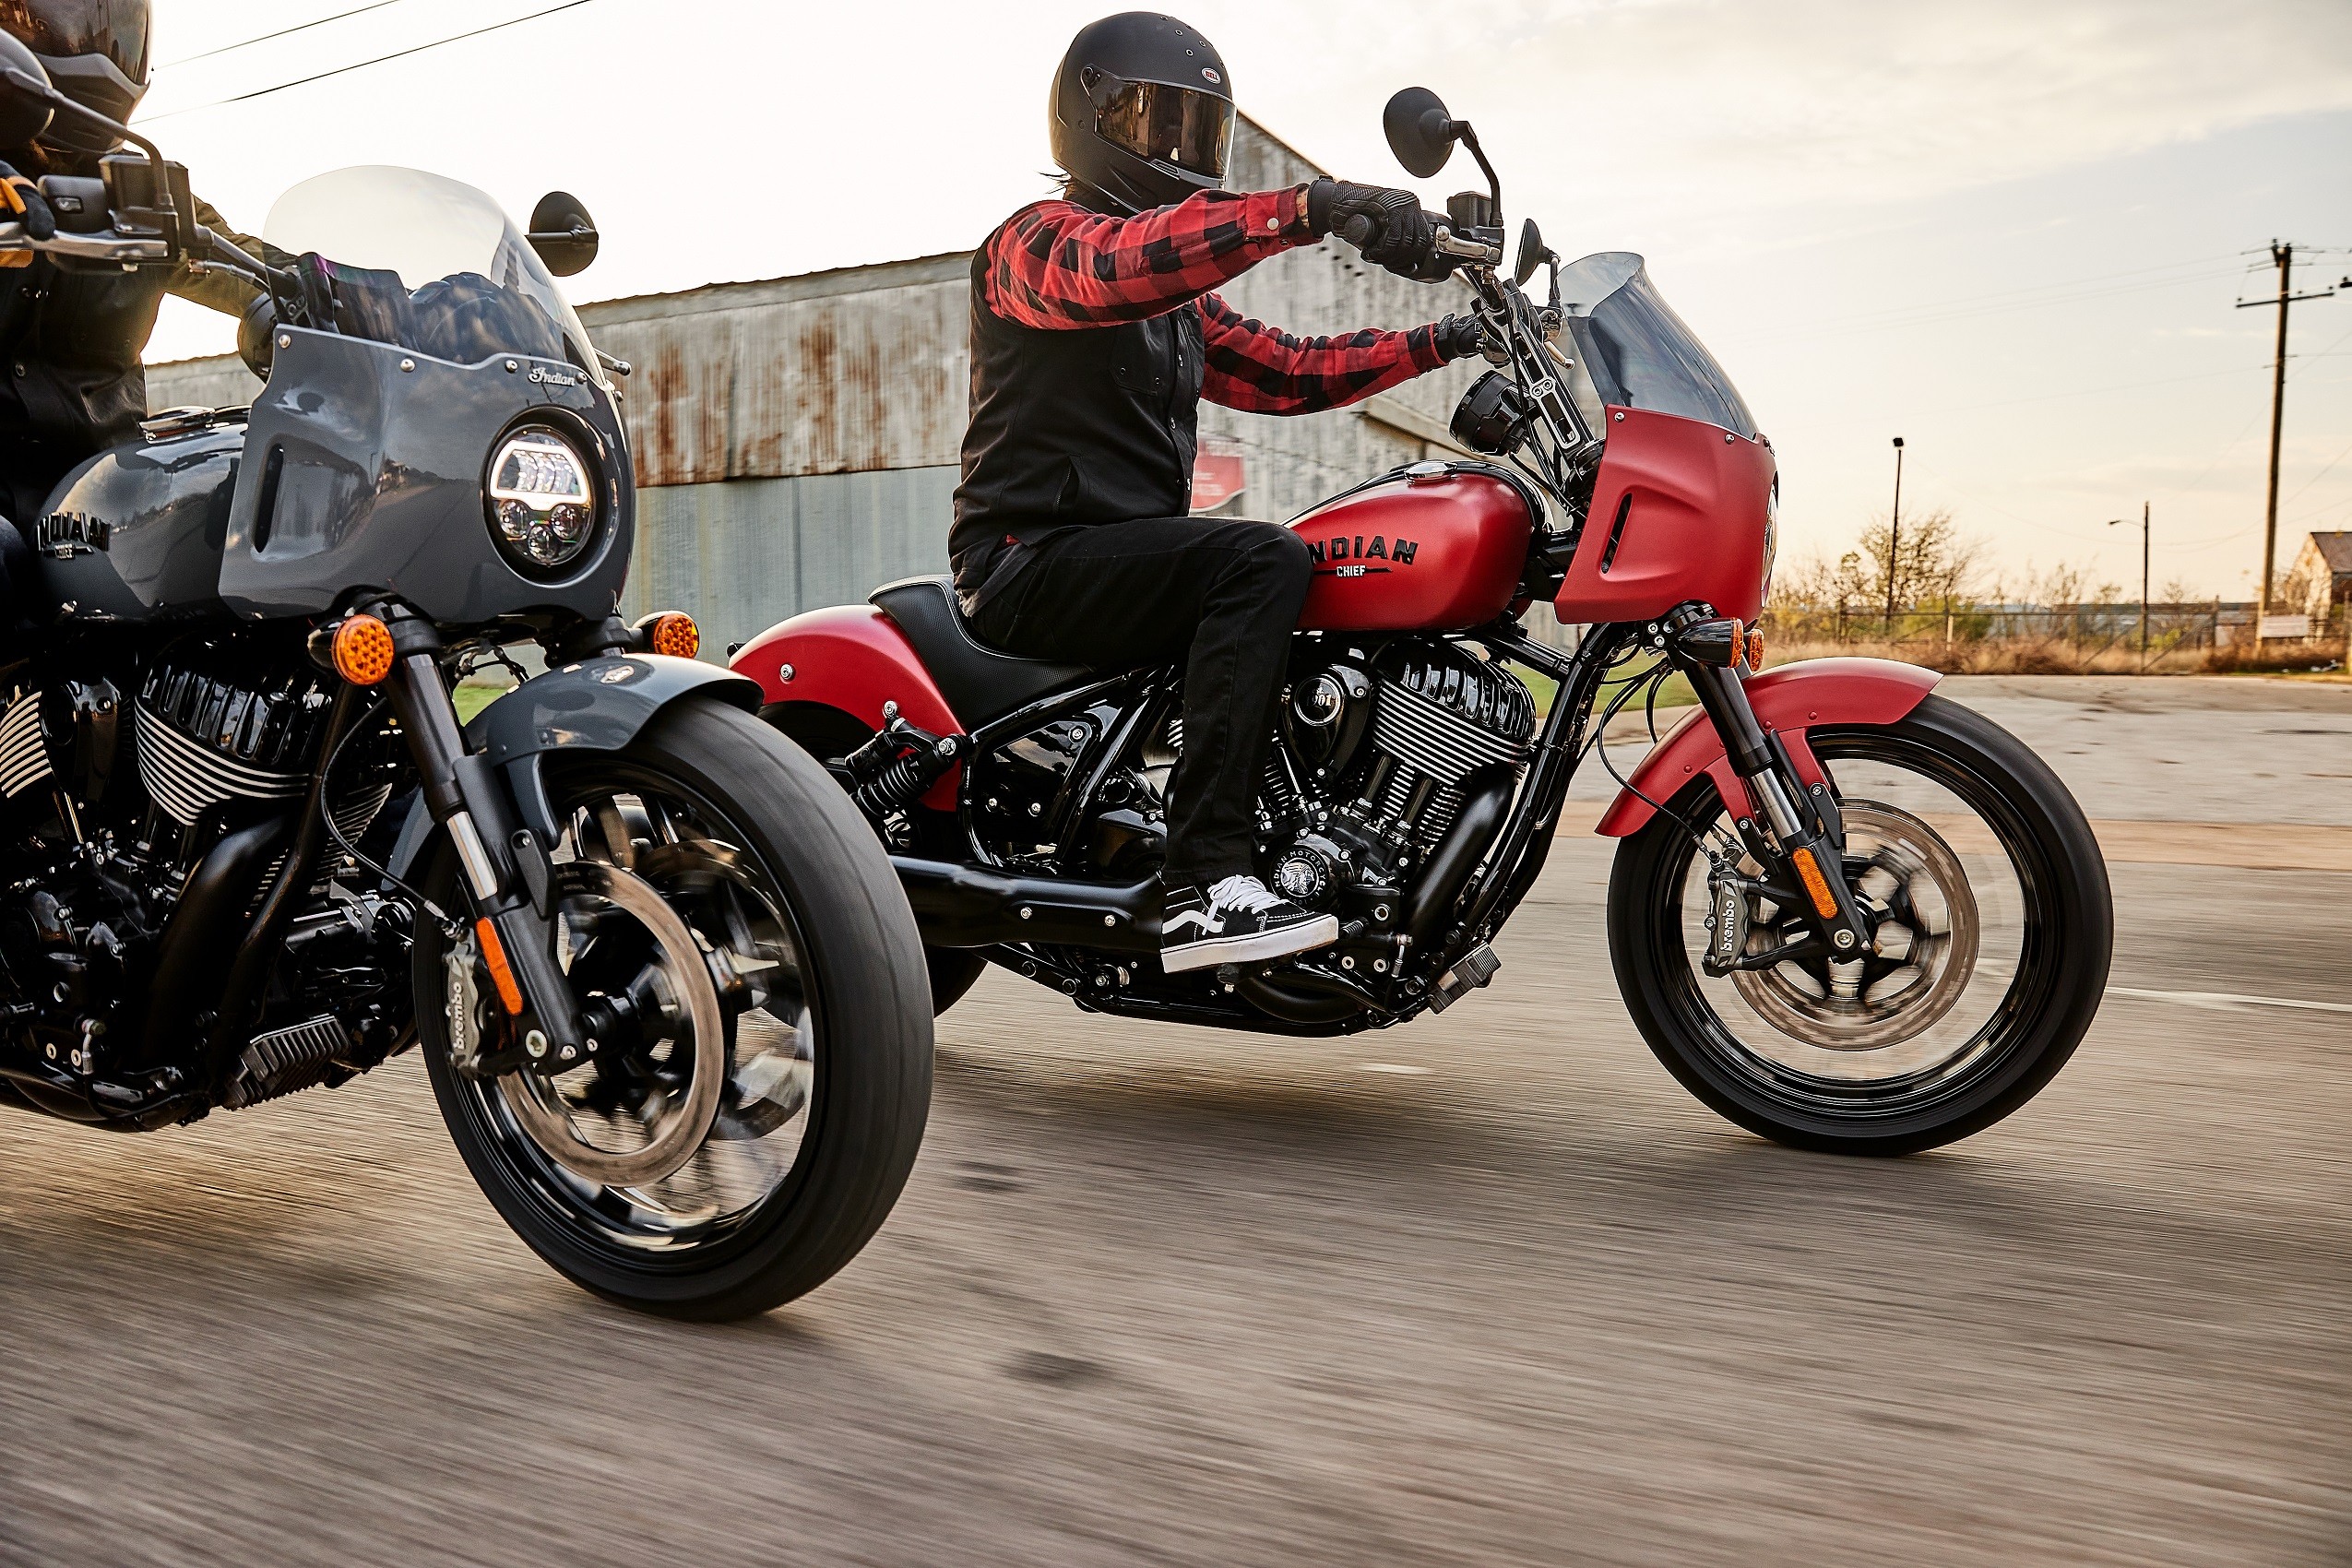 Indian Motorcycle Reveals the Sport Chief, a Performance Cruiser